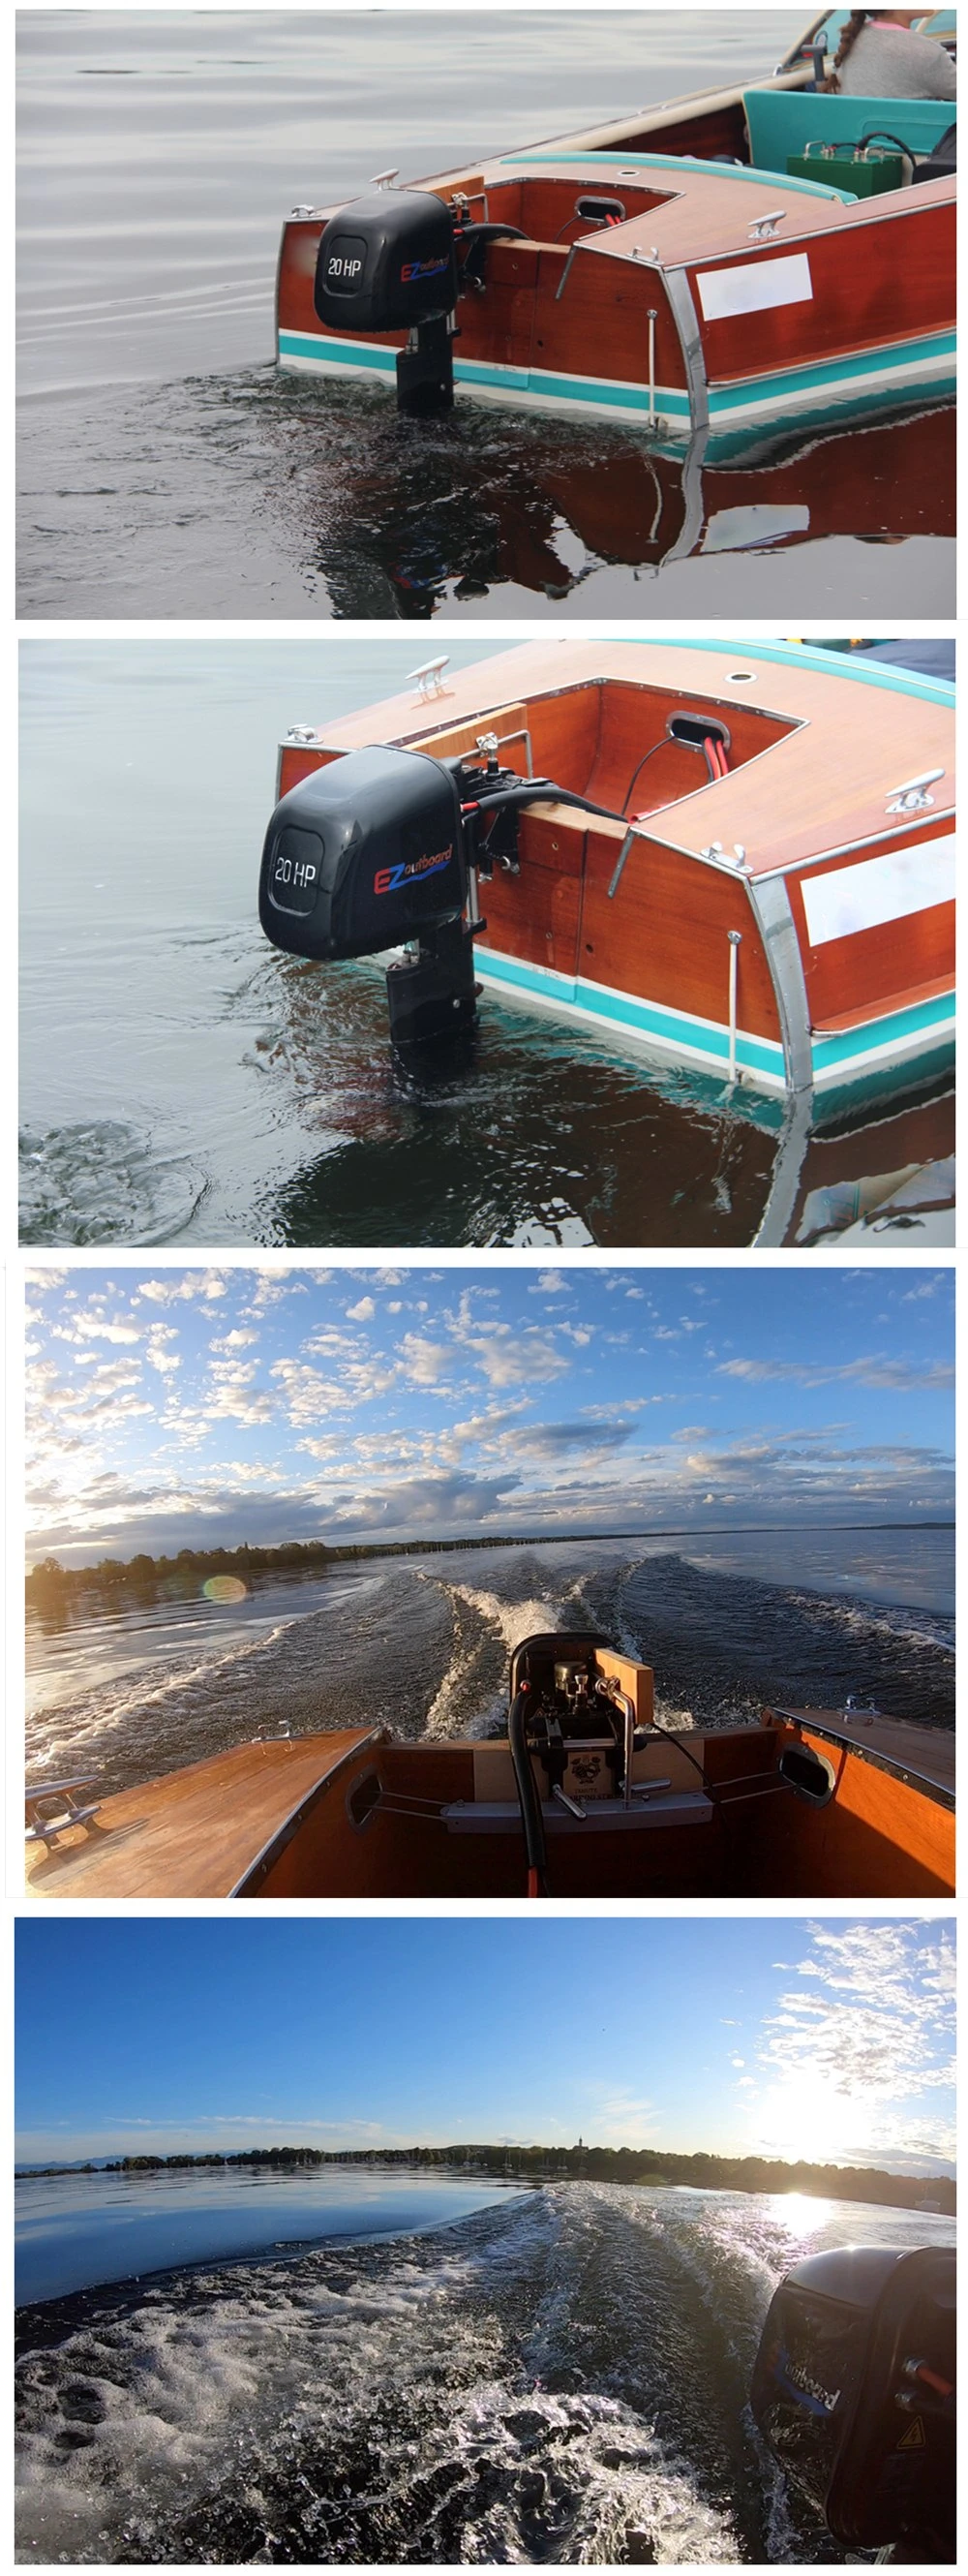 Innovative Technology 10HP Electric Outboard for Fishing Boats and Tender Boats